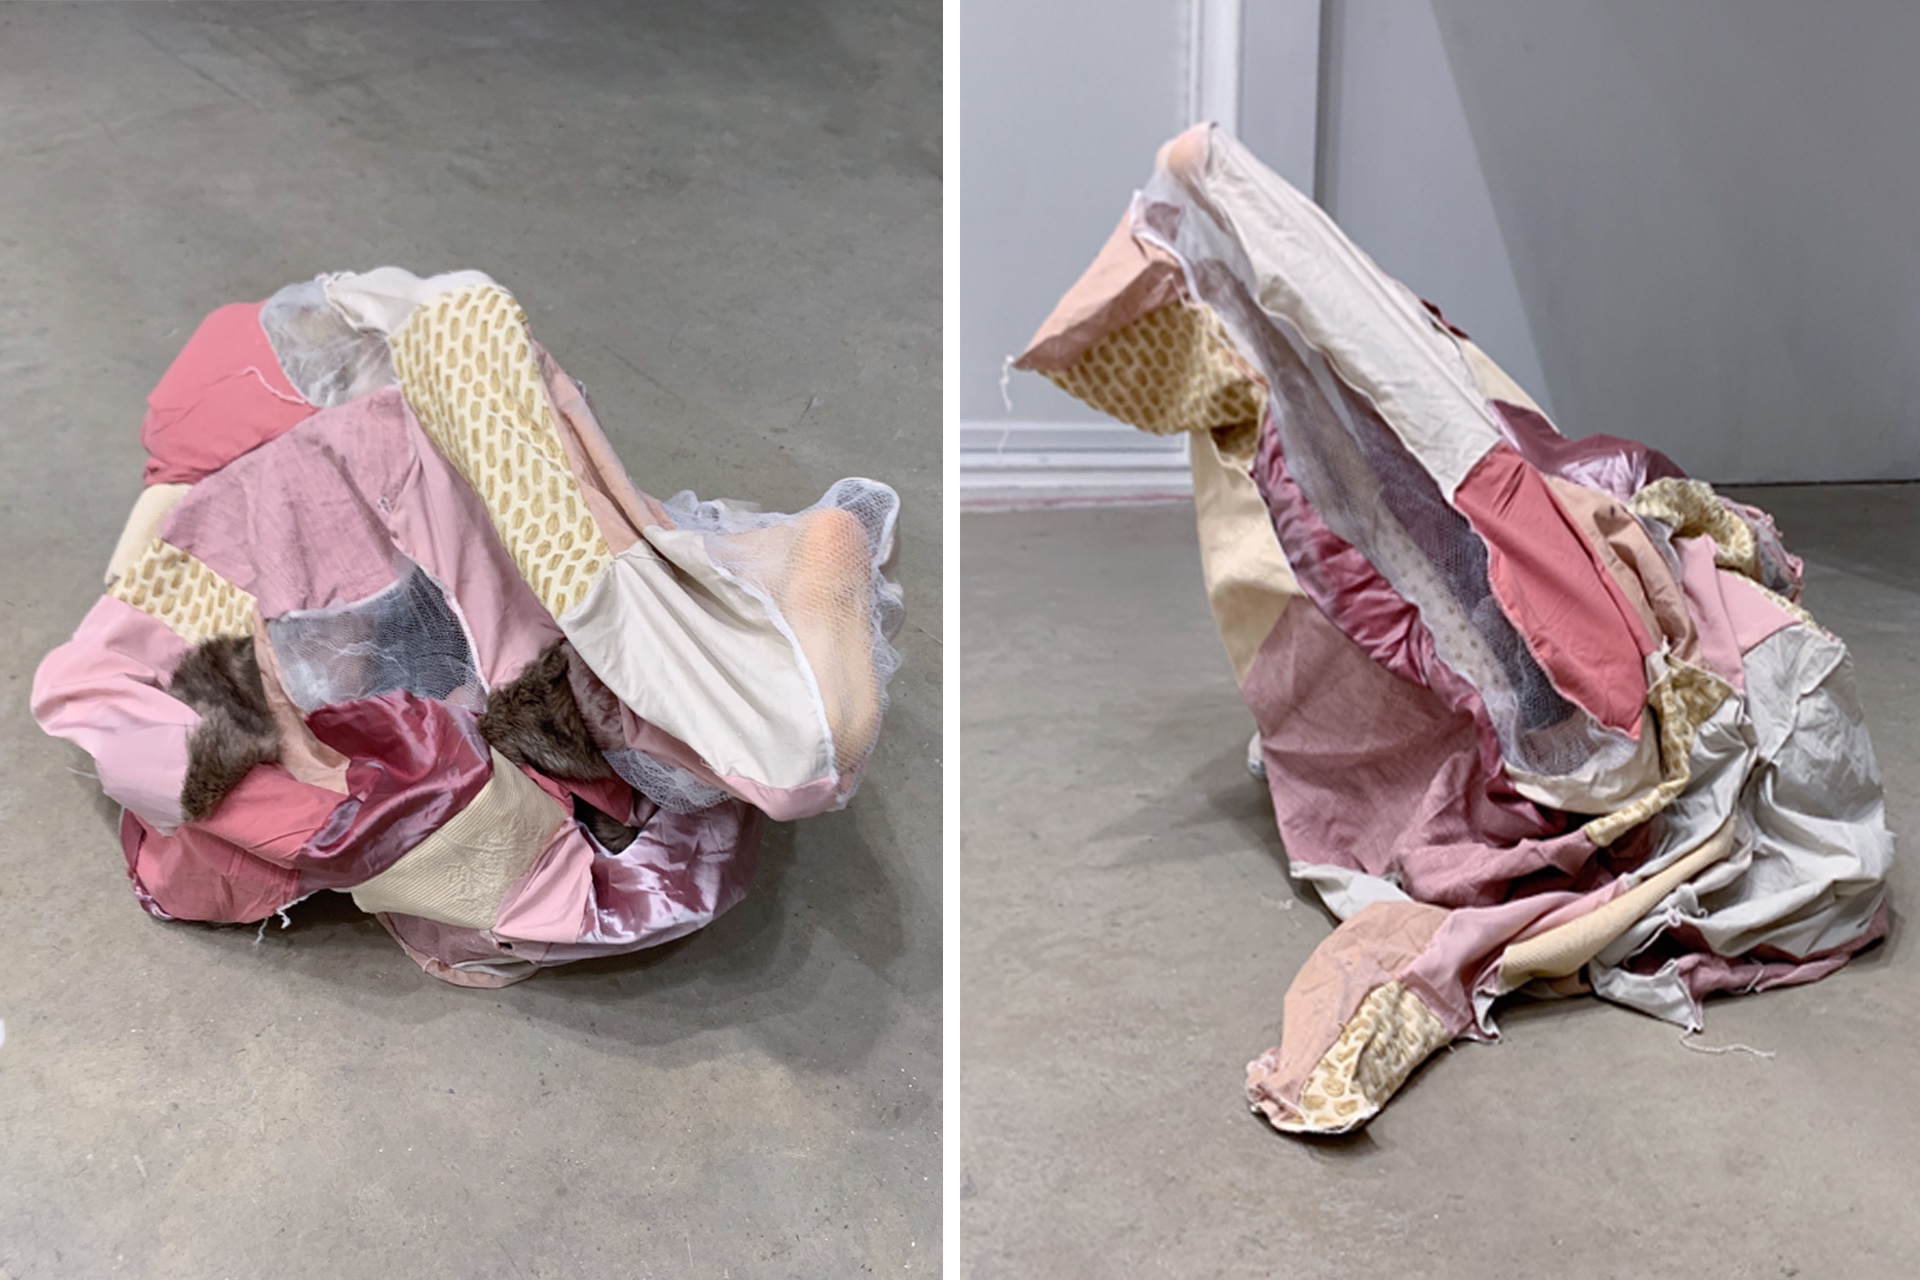 Two images, side by side, display a strange, sack-like fabric mass in different positions. The colour of the fabrics are tan, cream, and dusty pink, with sections of dark fur.